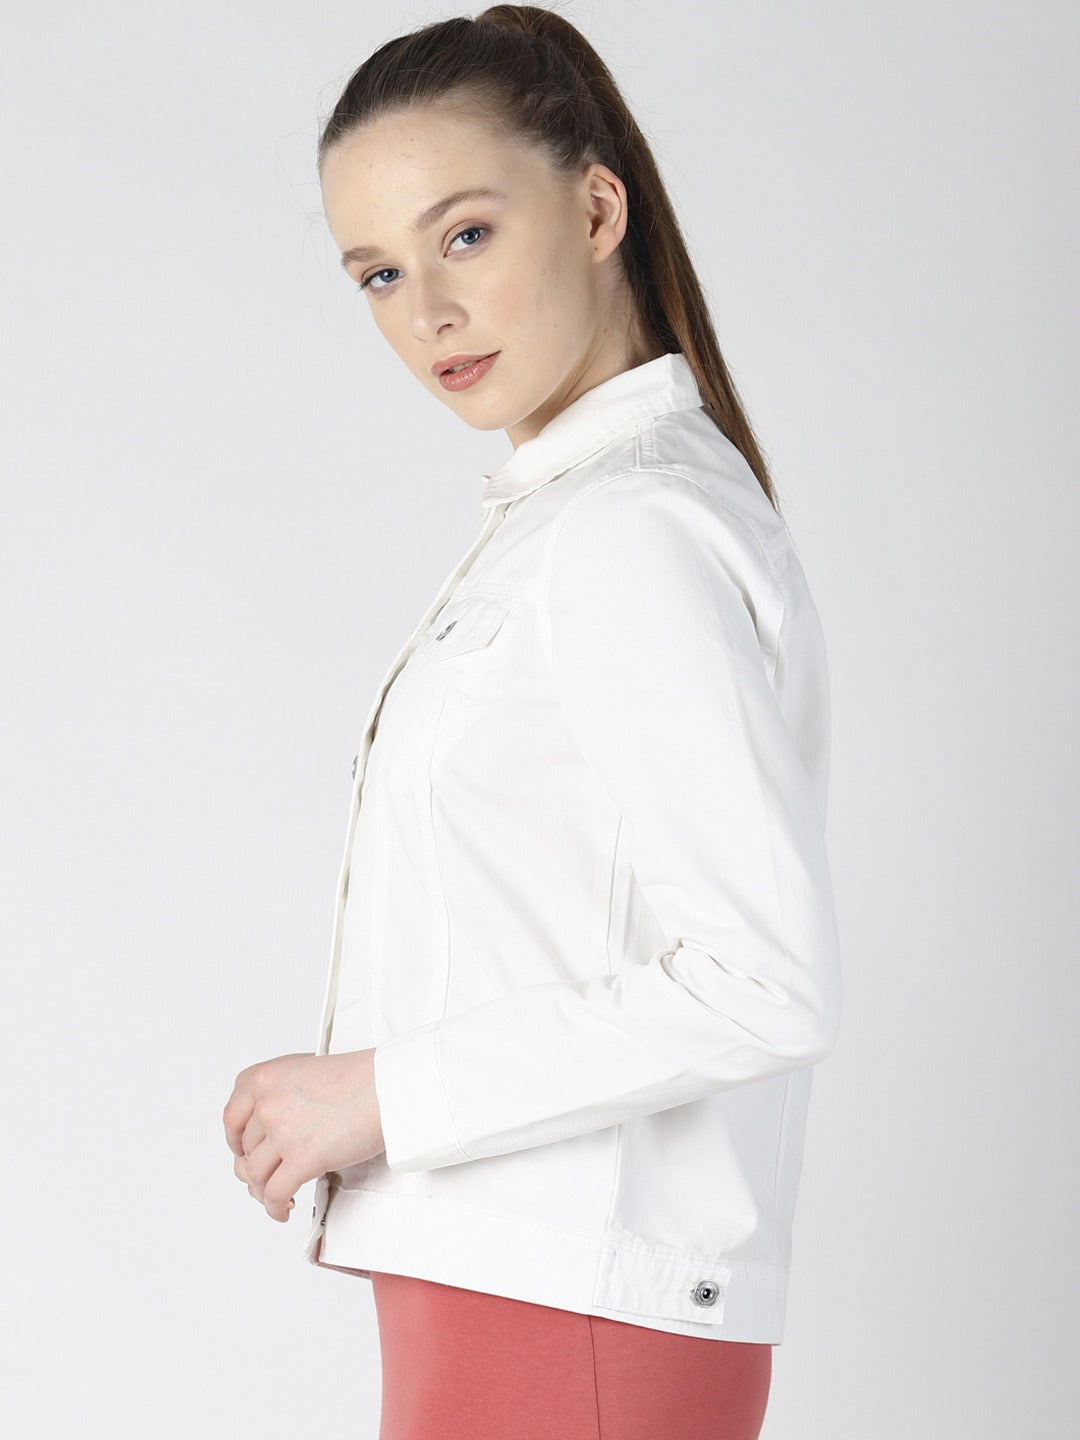 Women White Solid Jacket  - Front View - Available in Sizes L